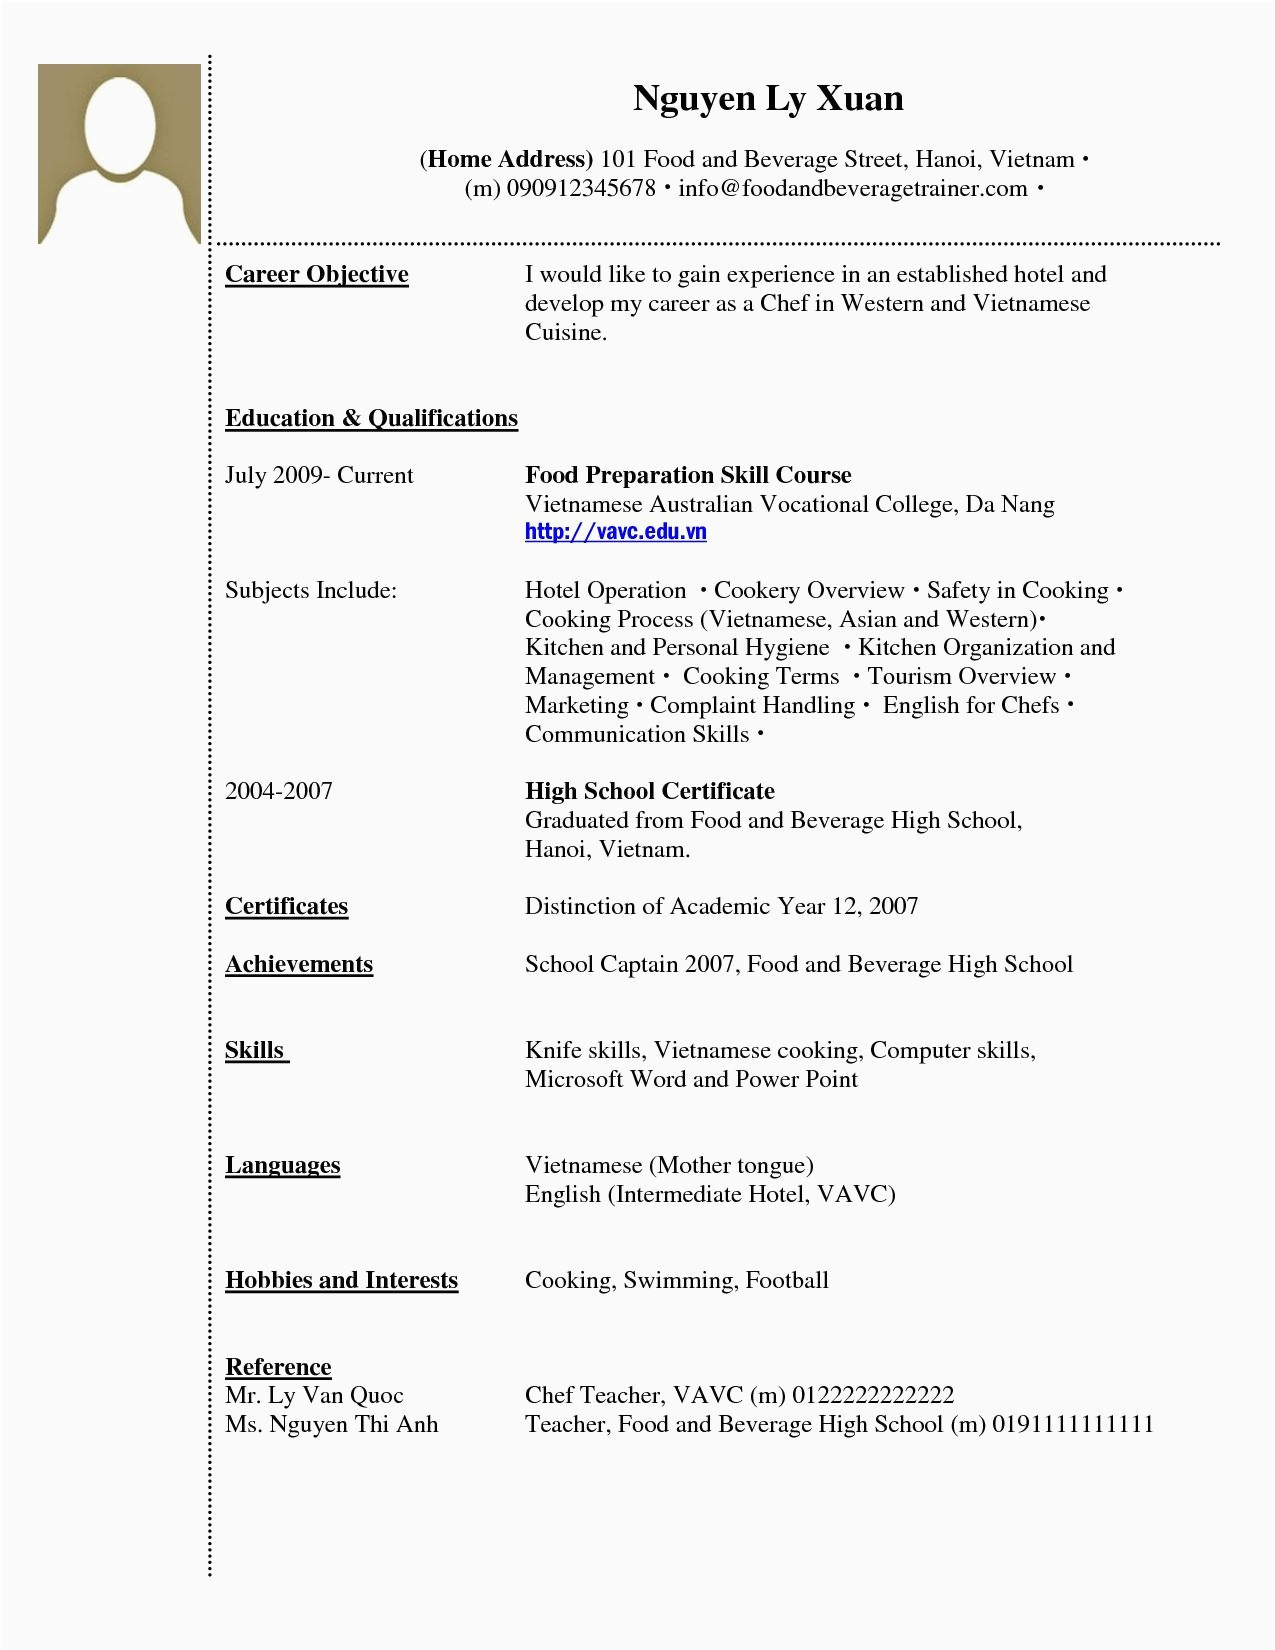 Resume Samples for Students with Little Experience Resume Examples for Students with Little Work Experience